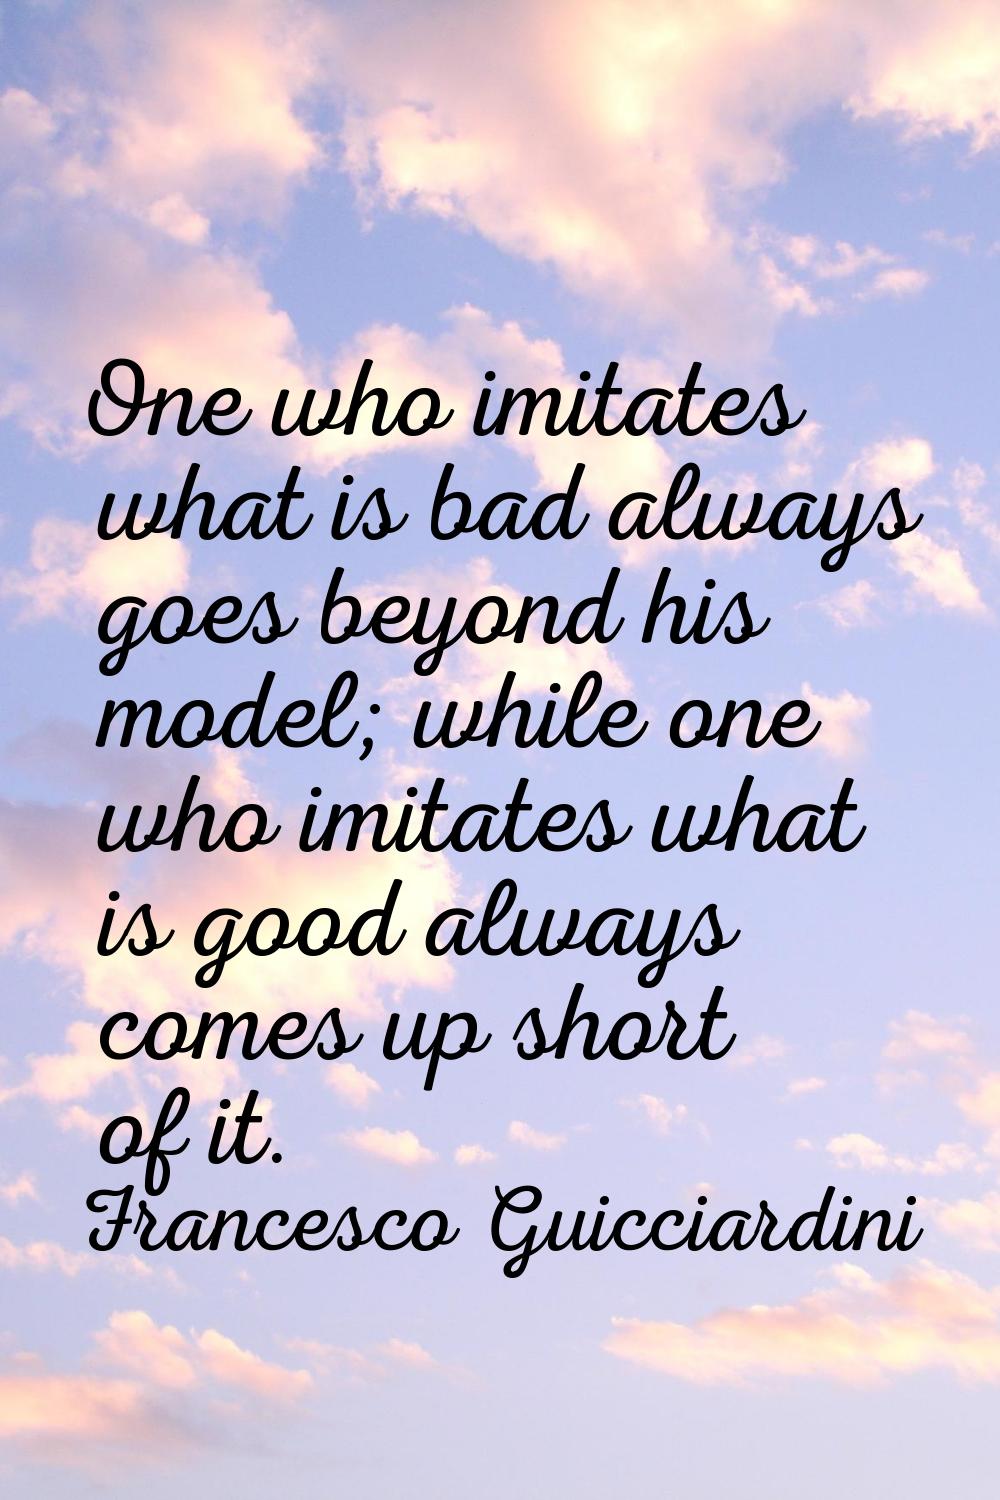 One who imitates what is bad always goes beyond his model; while one who imitates what is good alwa